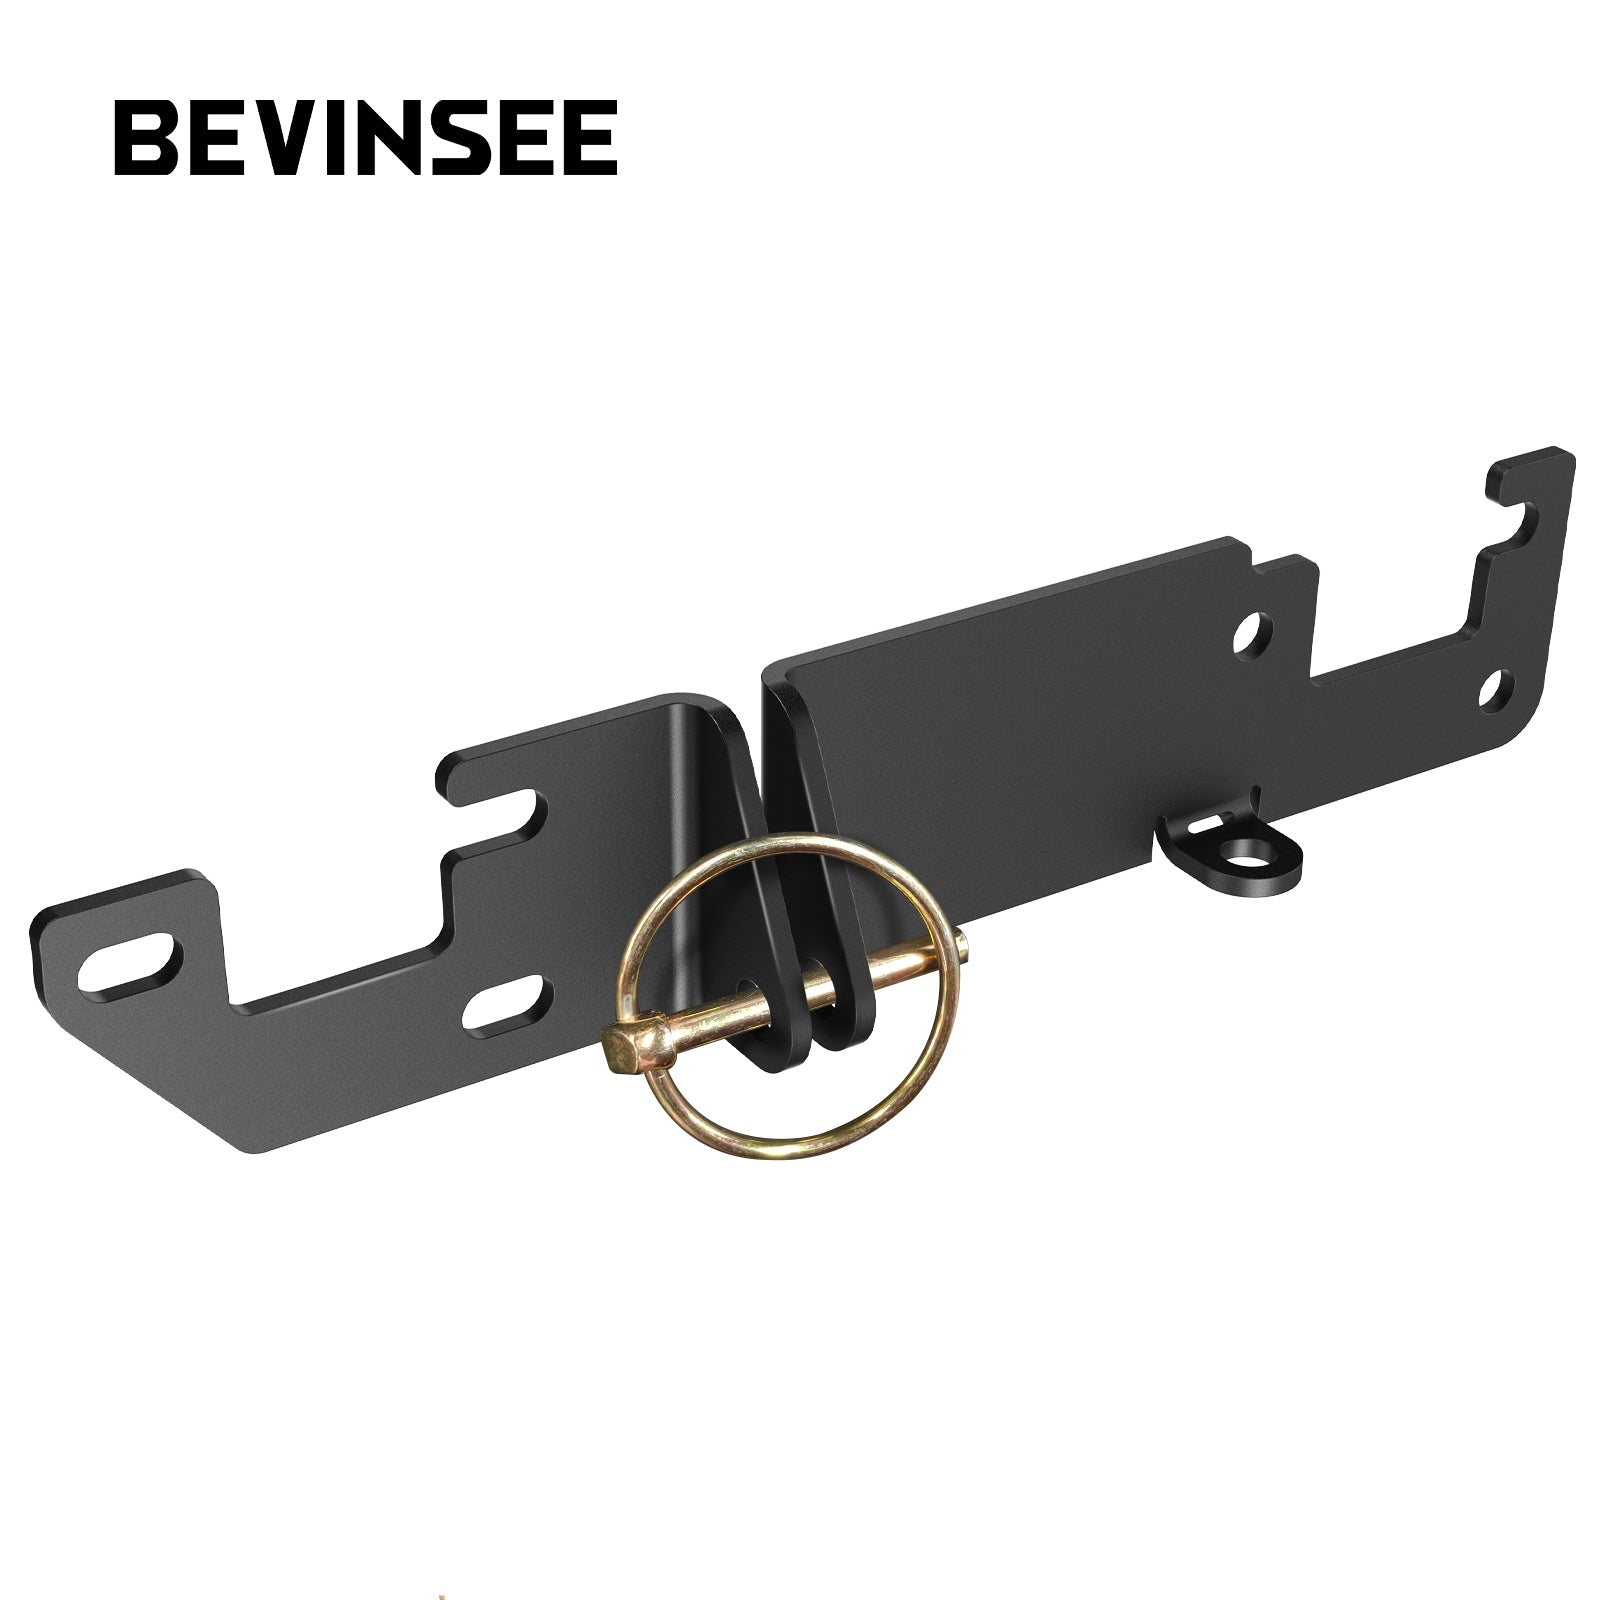 BEVINSEE 3mm Tailgate Rear Door Lock for Ducato Jumper Boxer X250 H1 H2 Roof